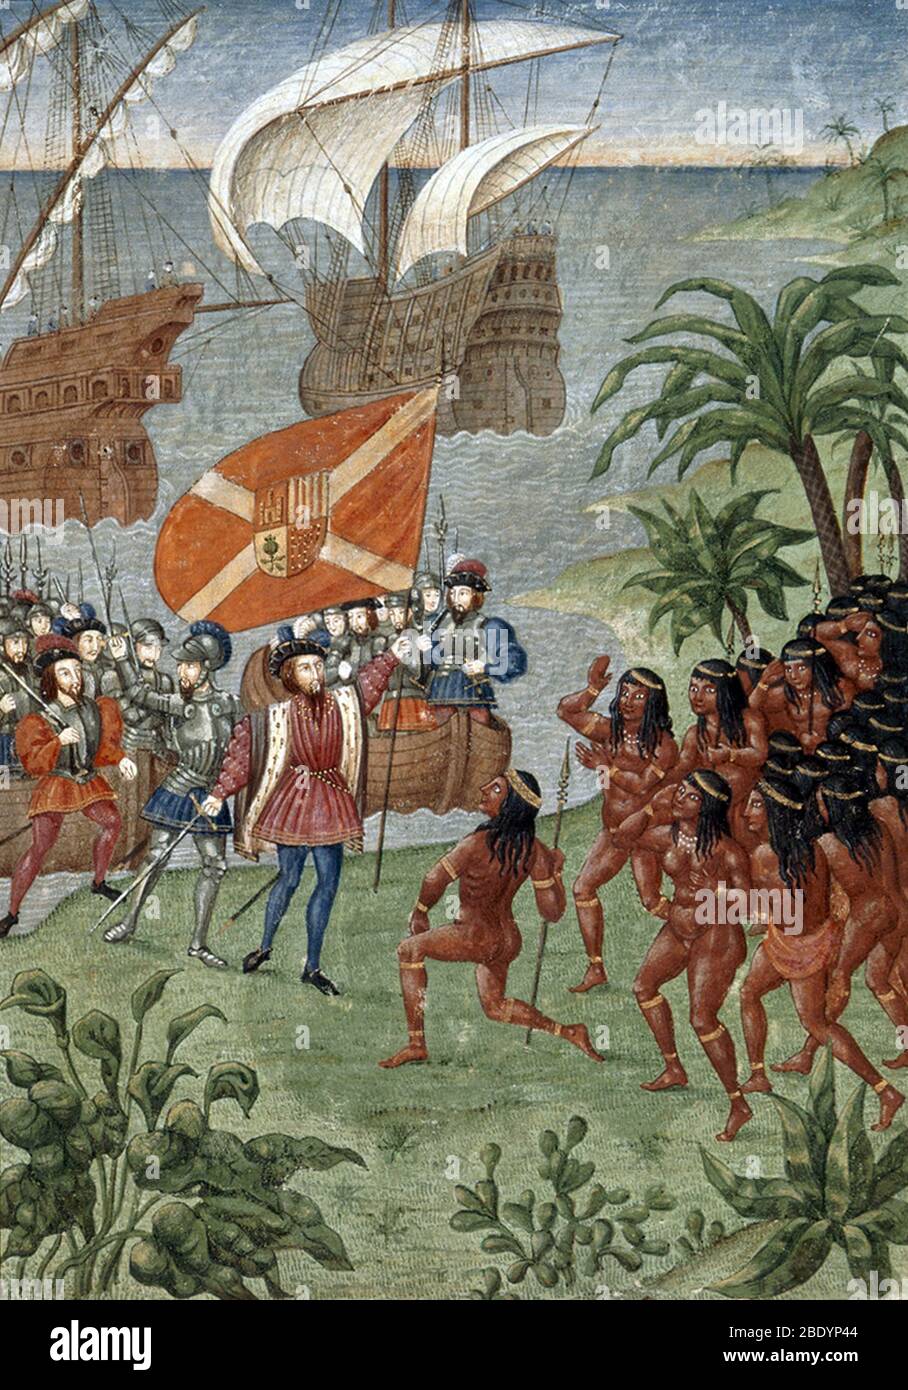 Hern√°n Cort√©s entrata in Messico, 1519 Foto Stock